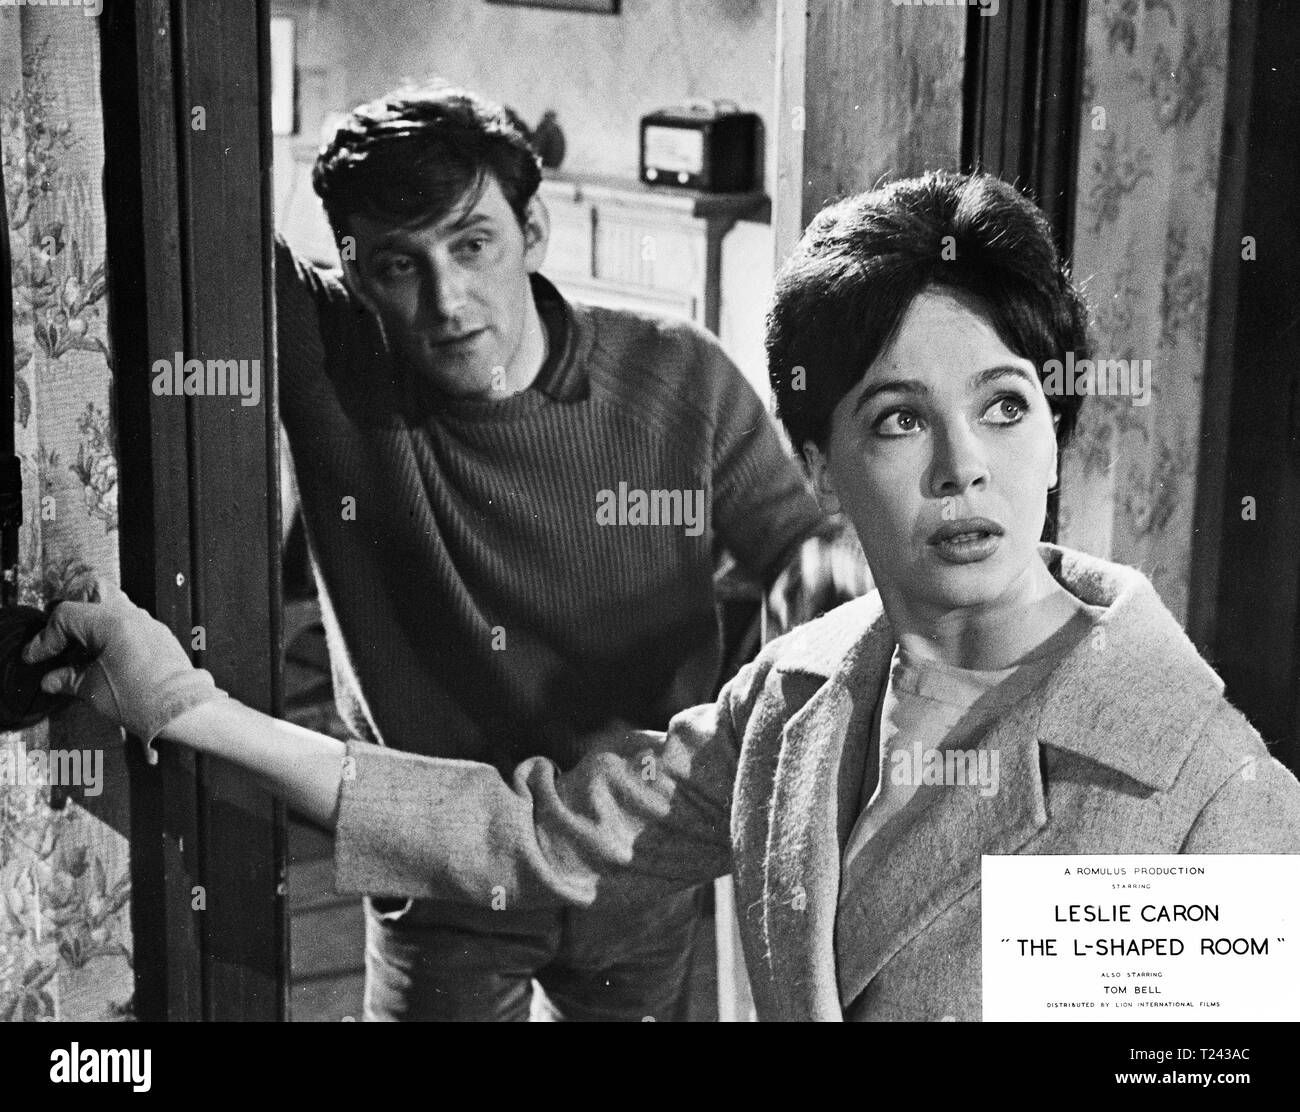 The L-Shaped Room (1962) Leslie Caron, Tom Bell, Date: 1962 Stock Photo ...